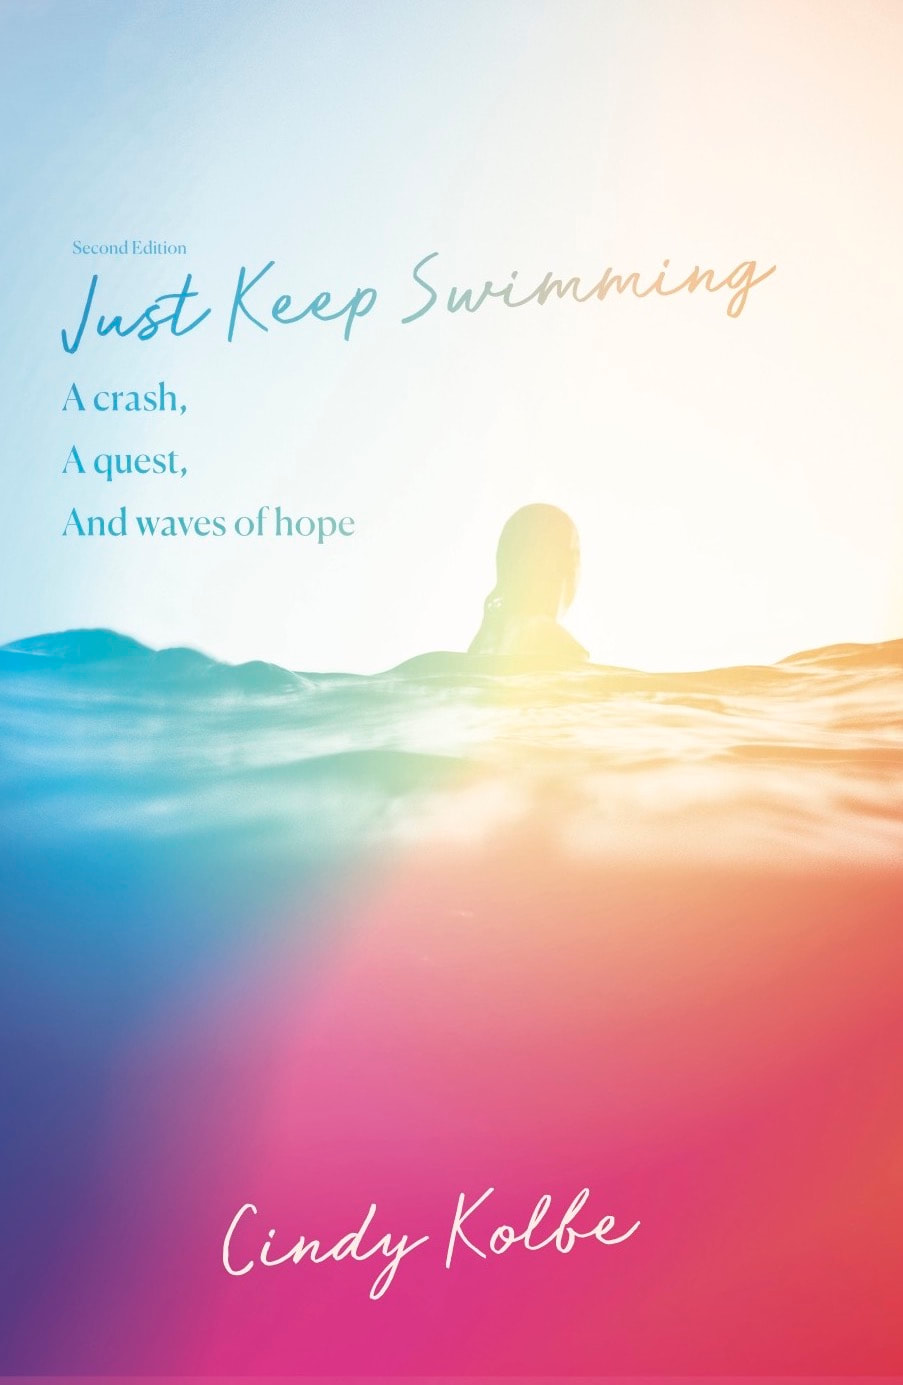 Text: Just Keep Swimming: a crash, a quest, and waves of hope. Coming Soon! Holidays gifts? Pre-orders start Nov. 15, 2022 at your favorite bookstores! Available Dec. 15, 2022